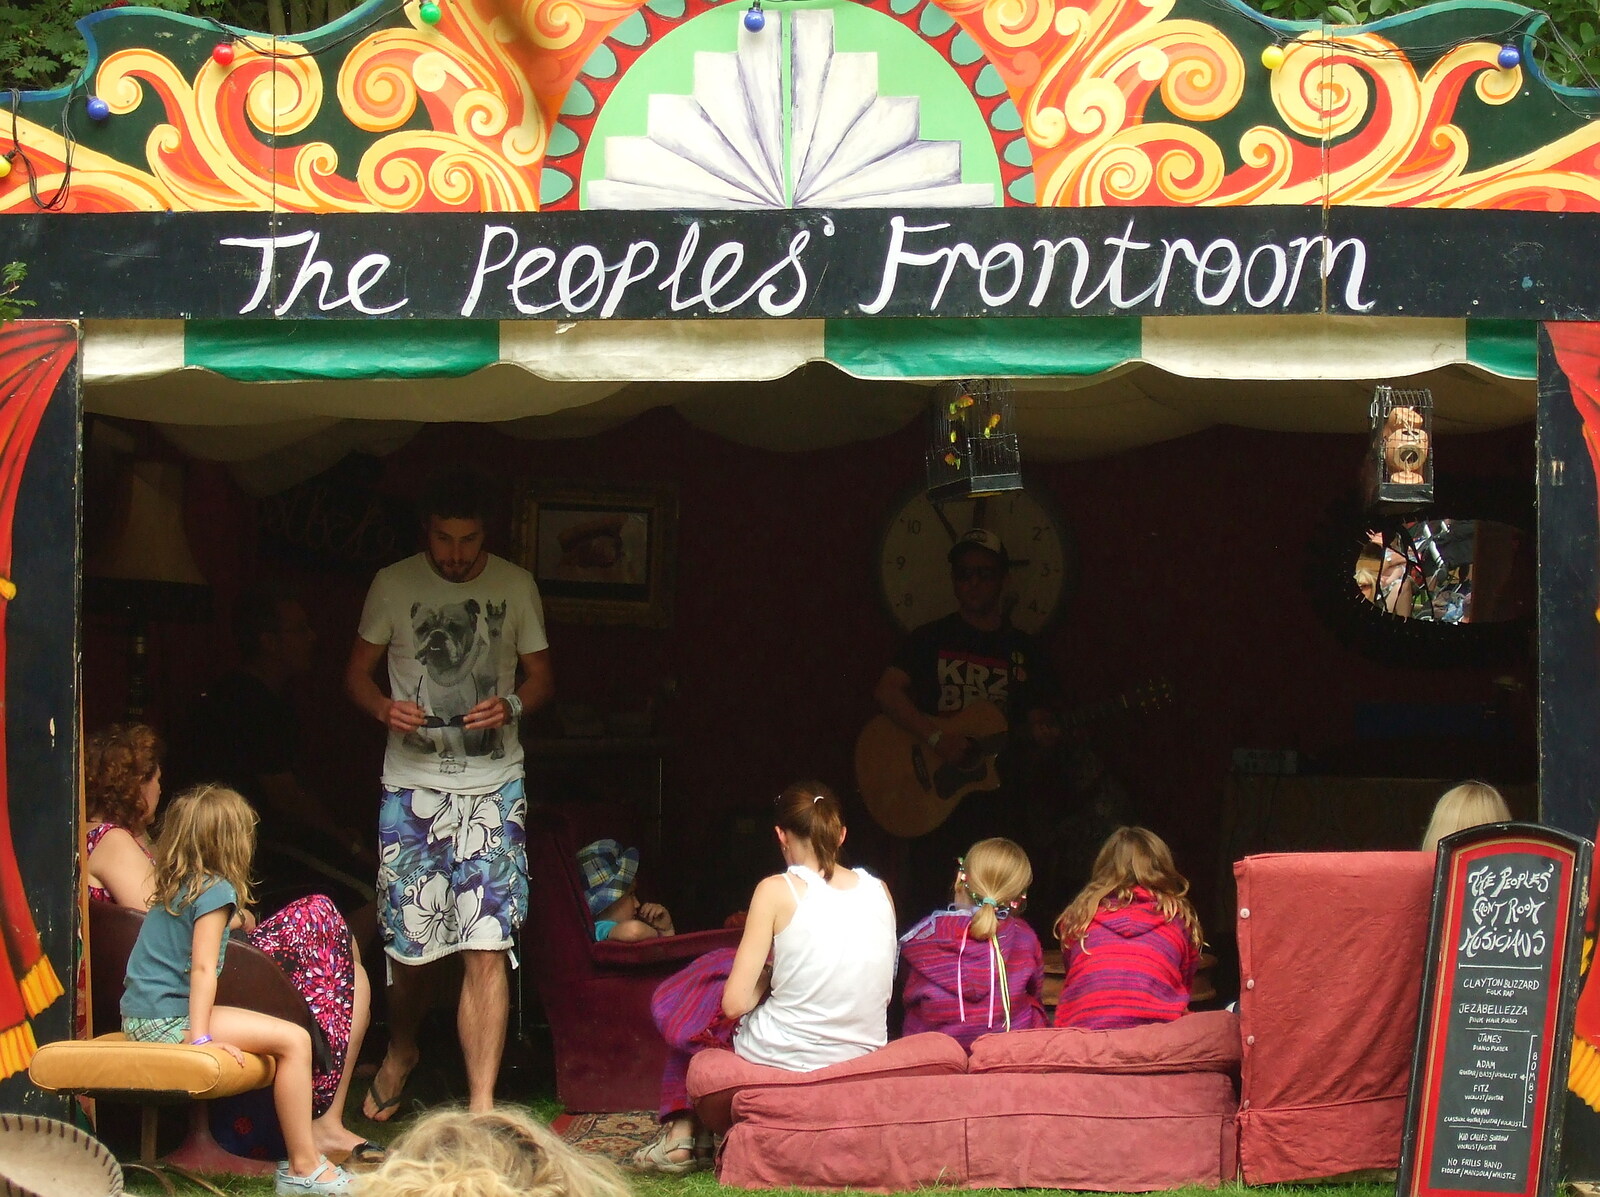 There's a performance in the People's Front Room from The Cambridge Folk Festival, Cherry Hinton, Cambridge - 28th July 2012